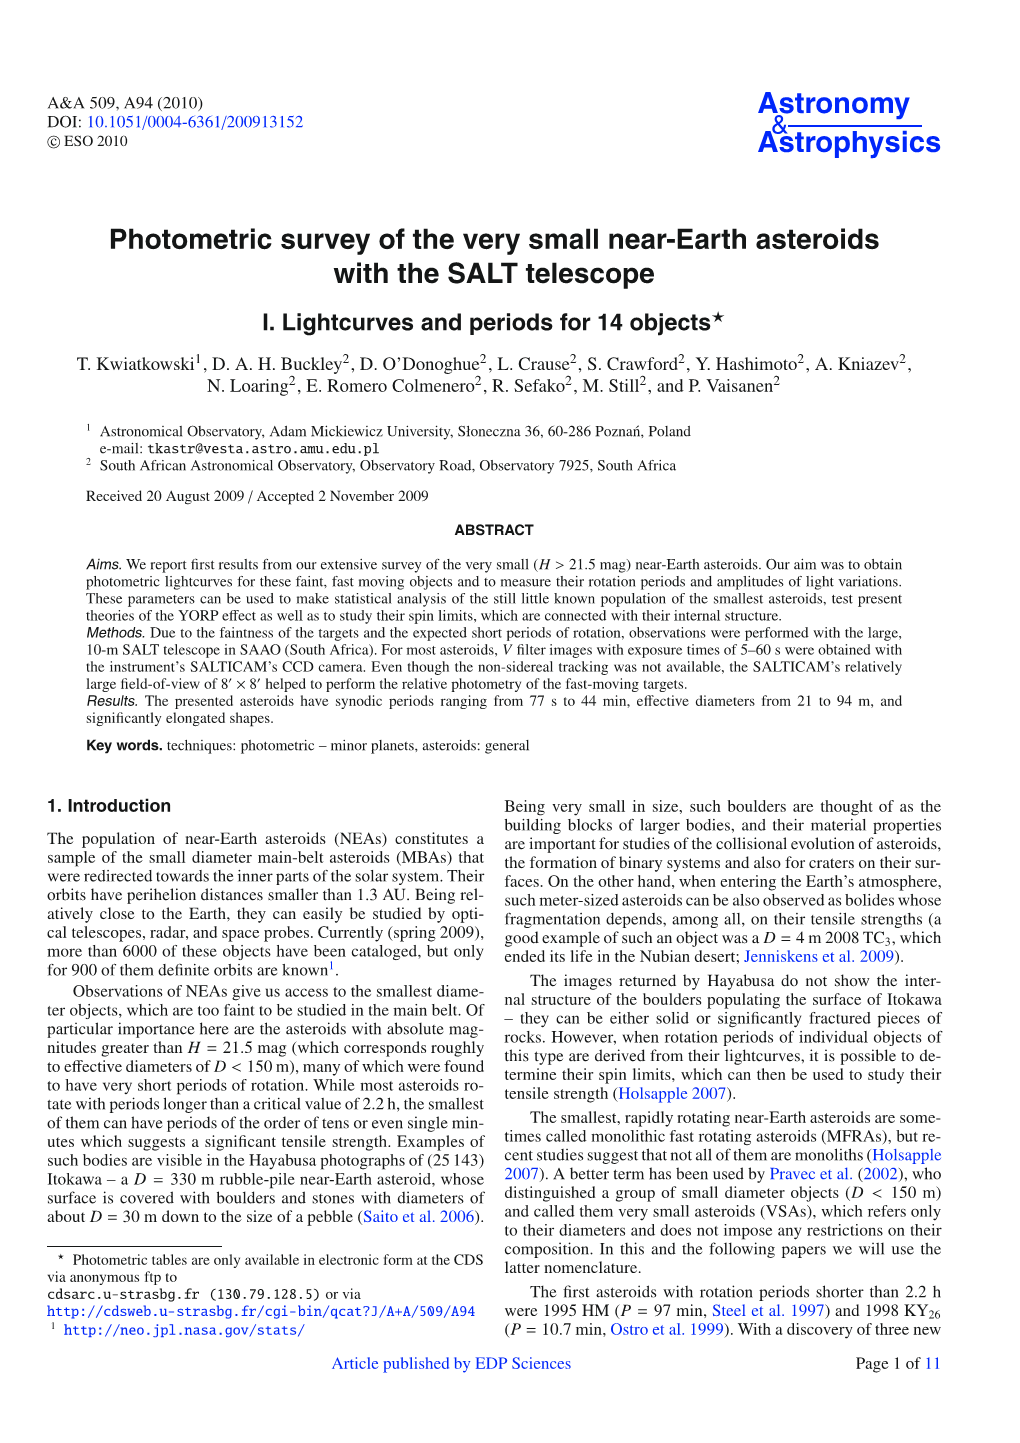 Photometric Survey of the Very Small Near-Earth Asteroids with the SALT Telescope I